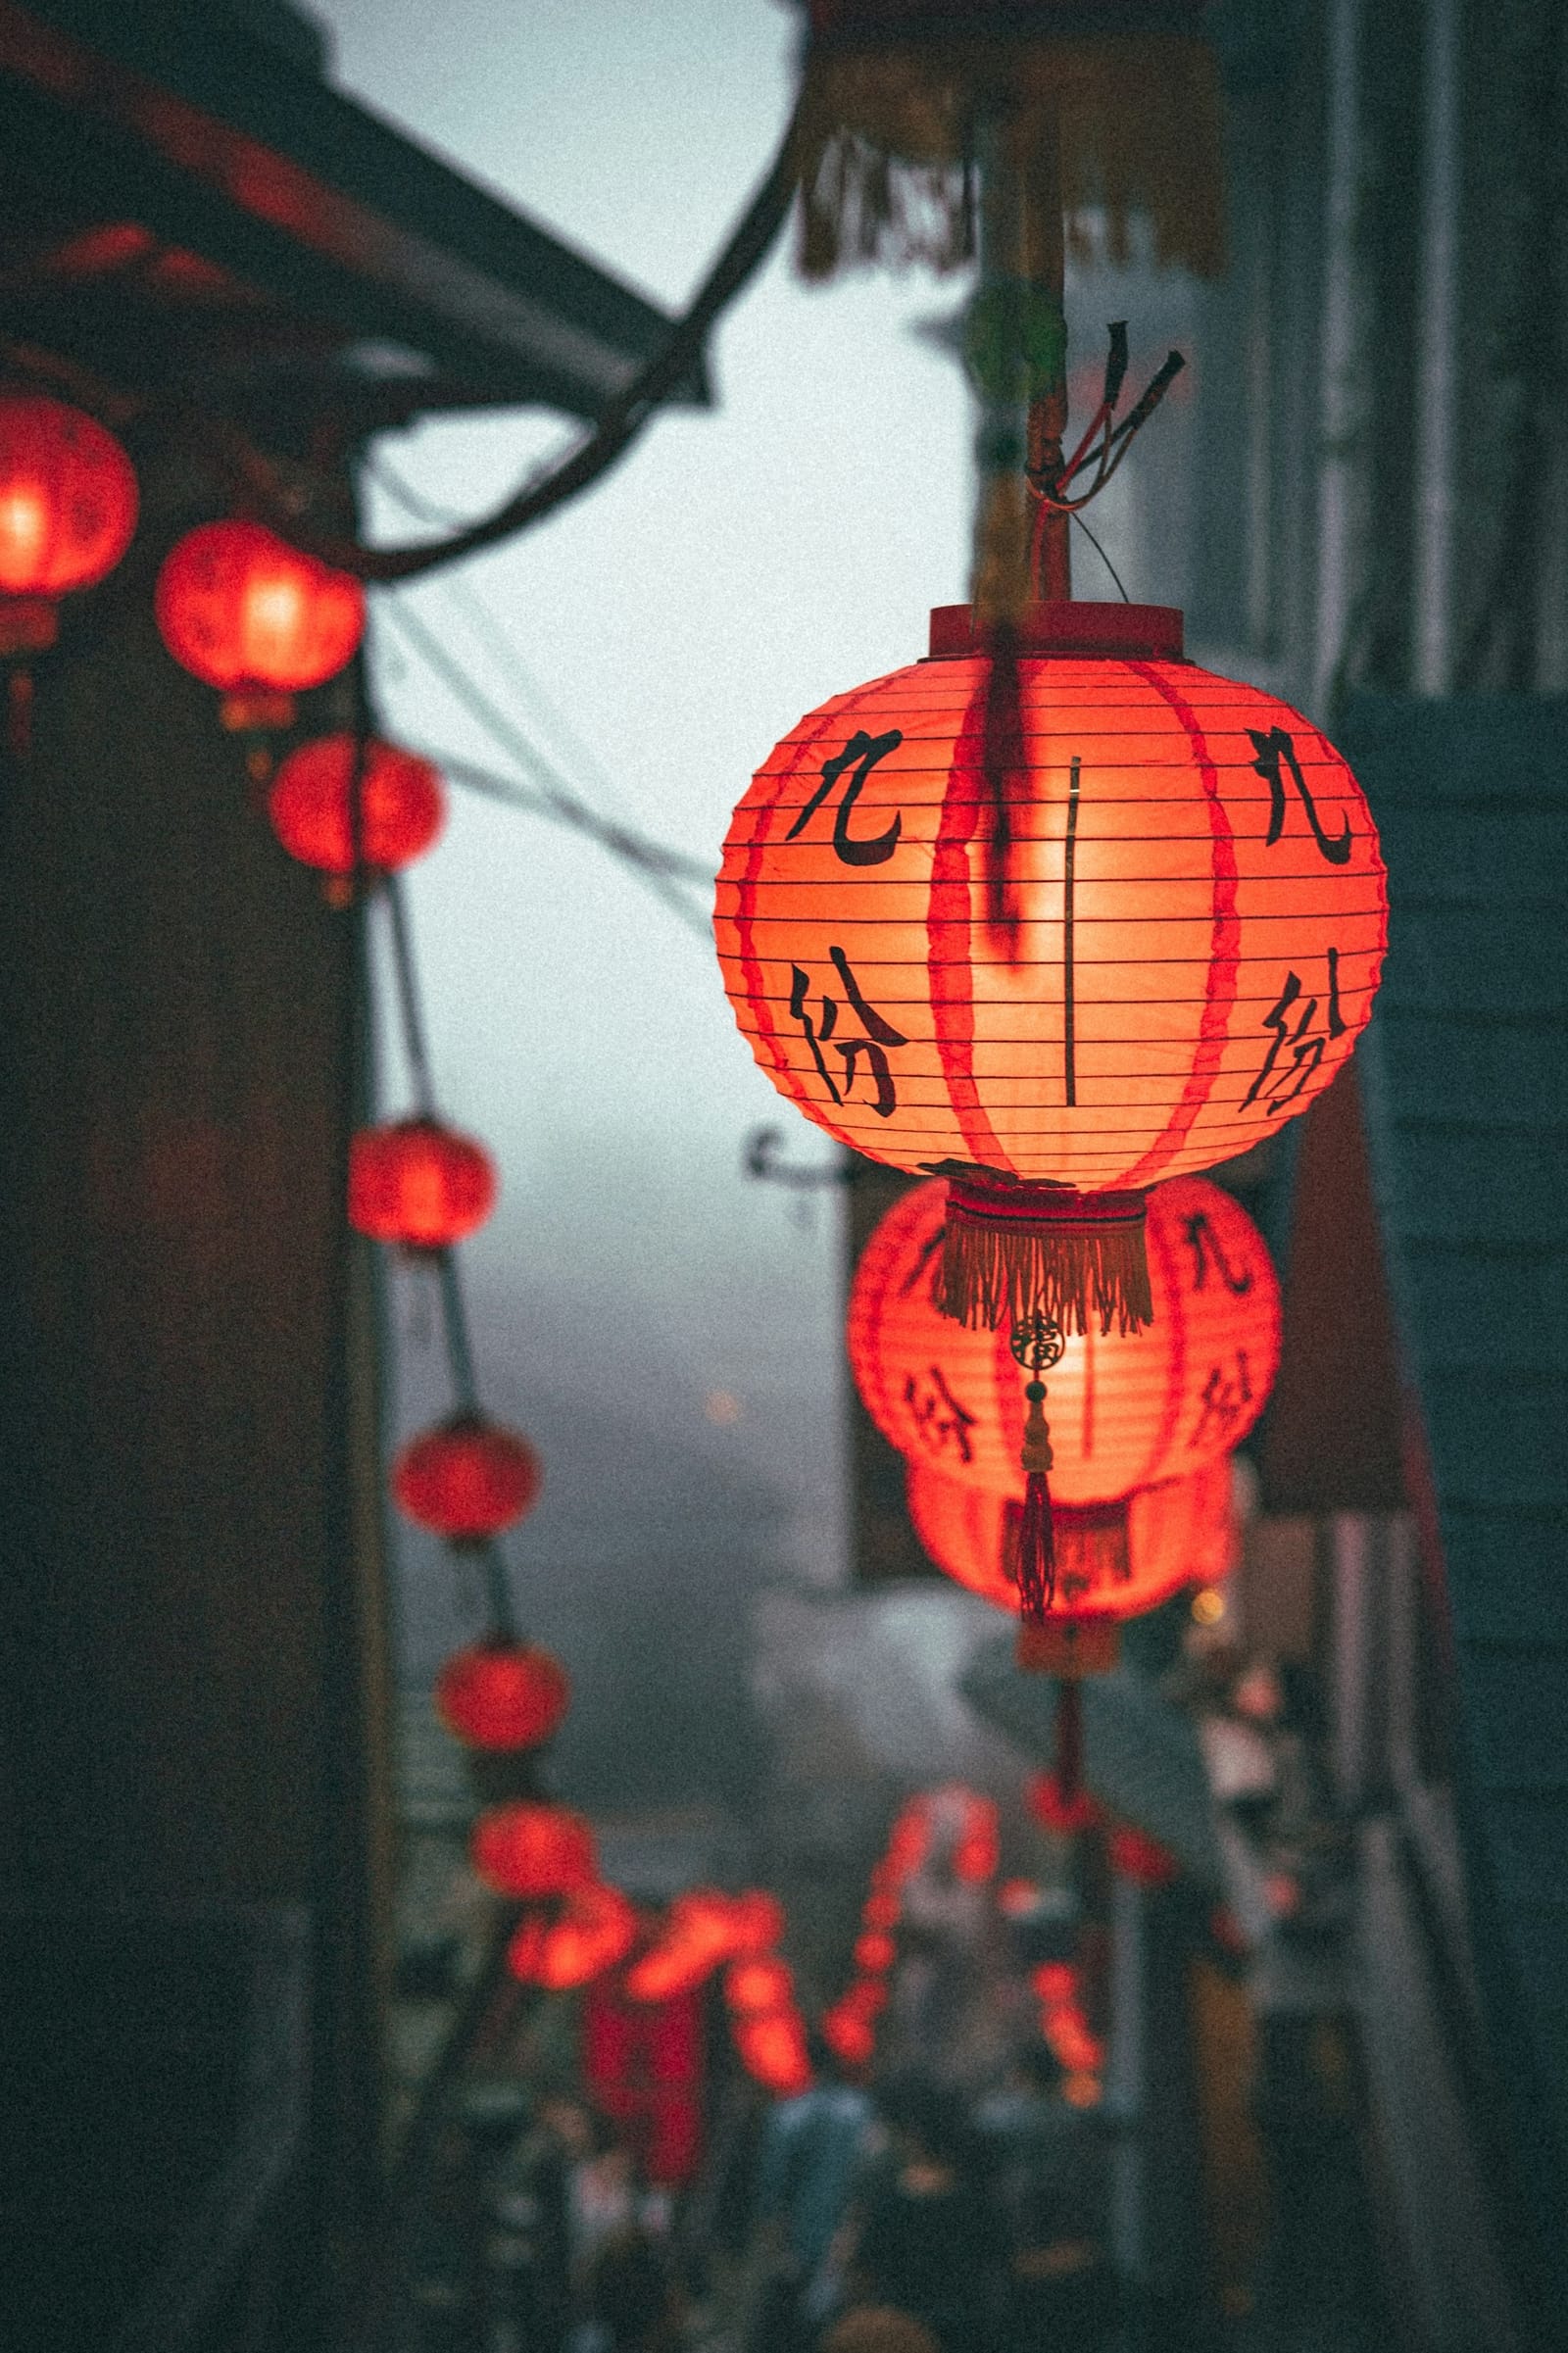 Essential Mandarin Phrases for Traveling with Children in China